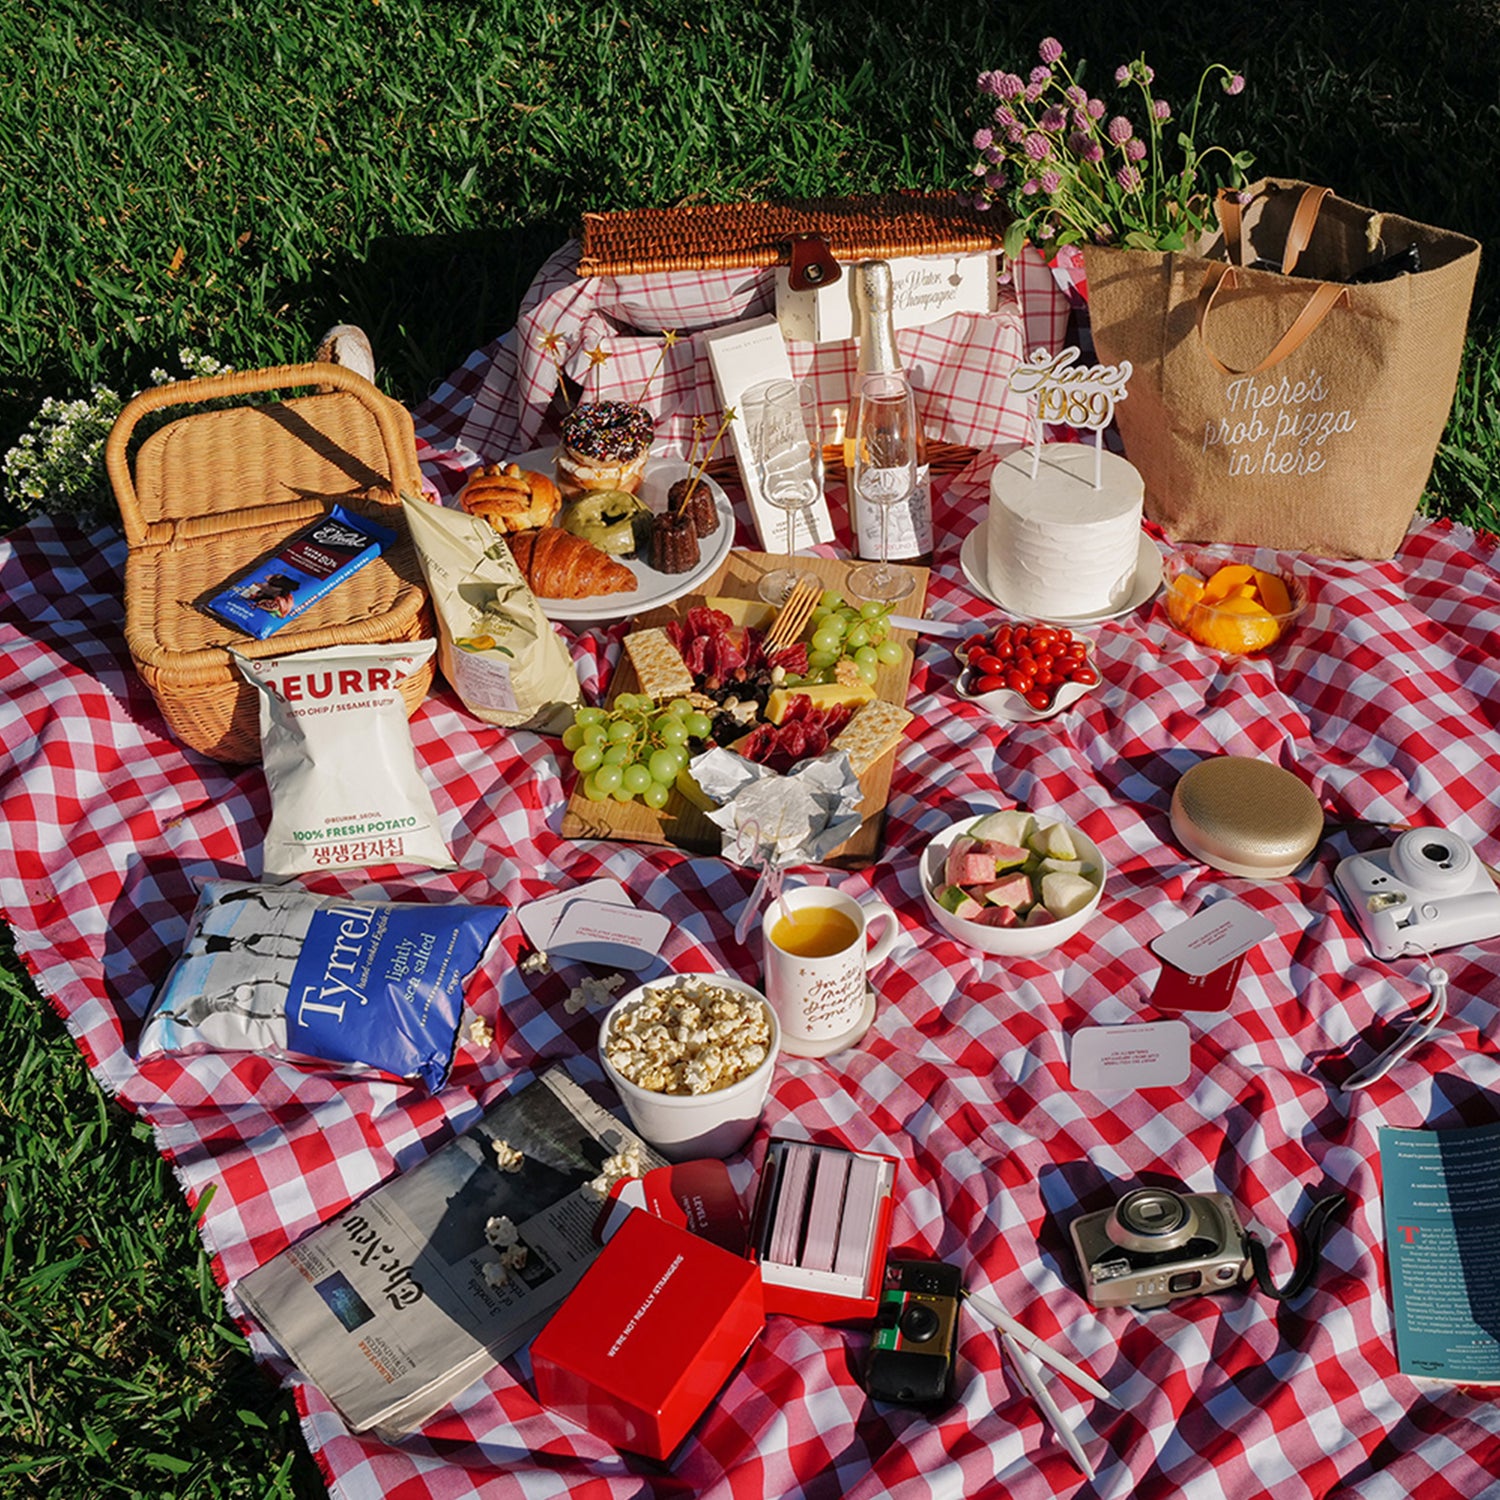 Sun-Kissed Celebrations: How to Host the Dreamiest Summer Picnic